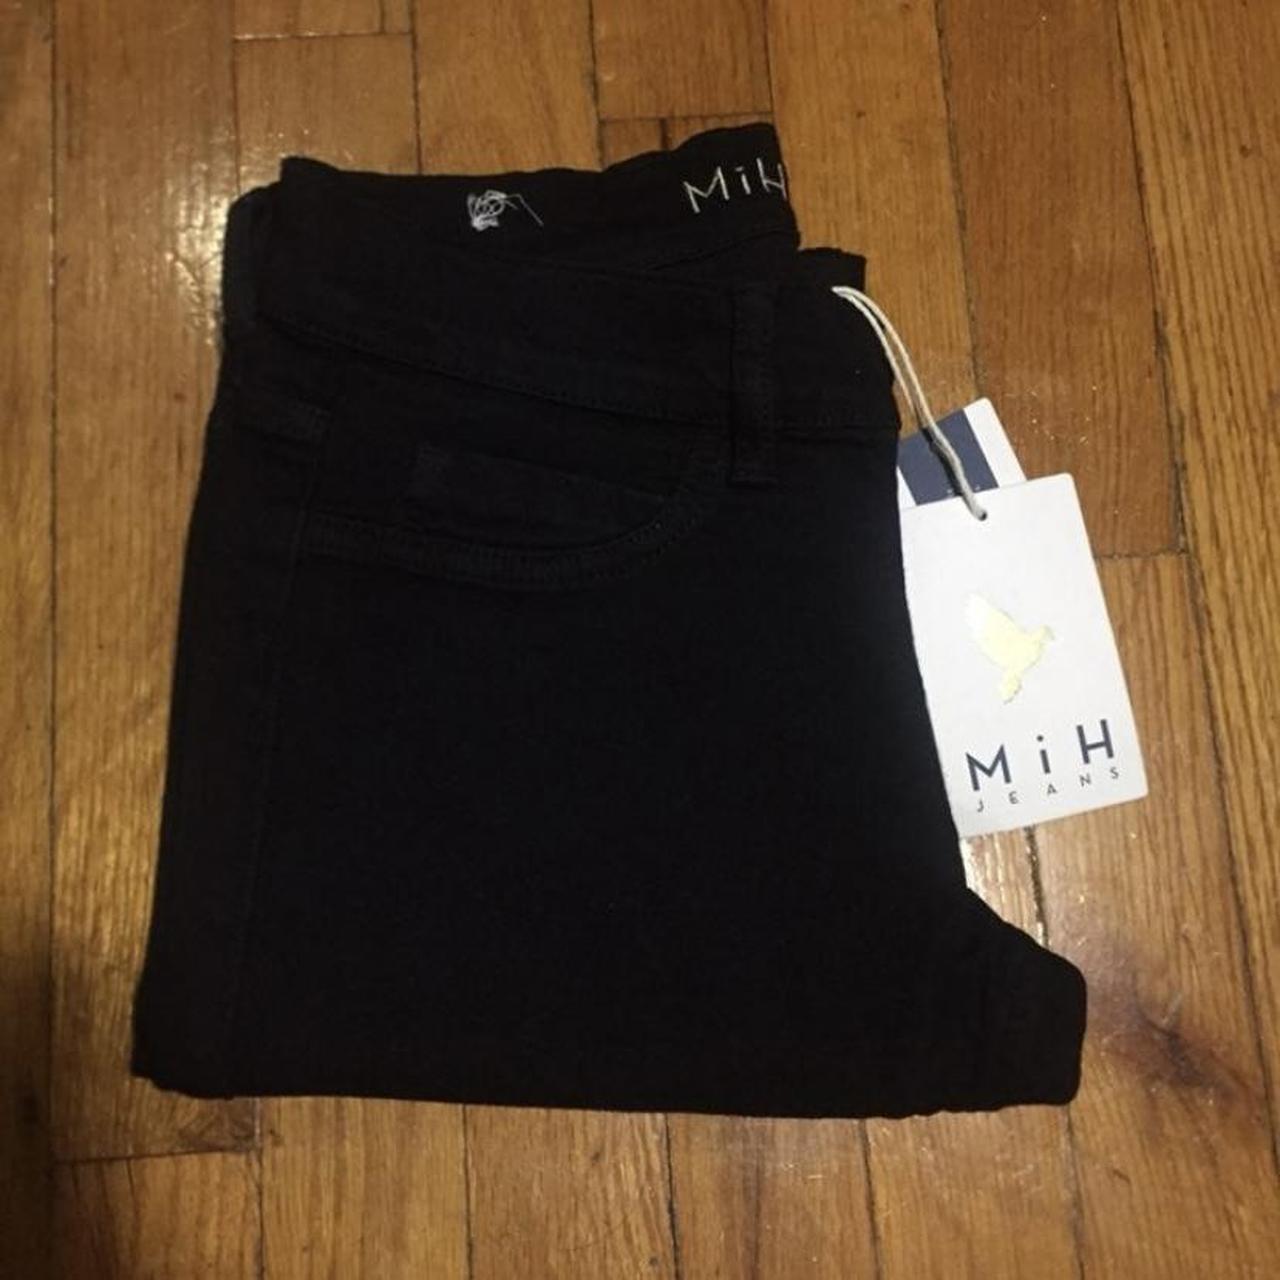 MiH Women's Black and White Jeans